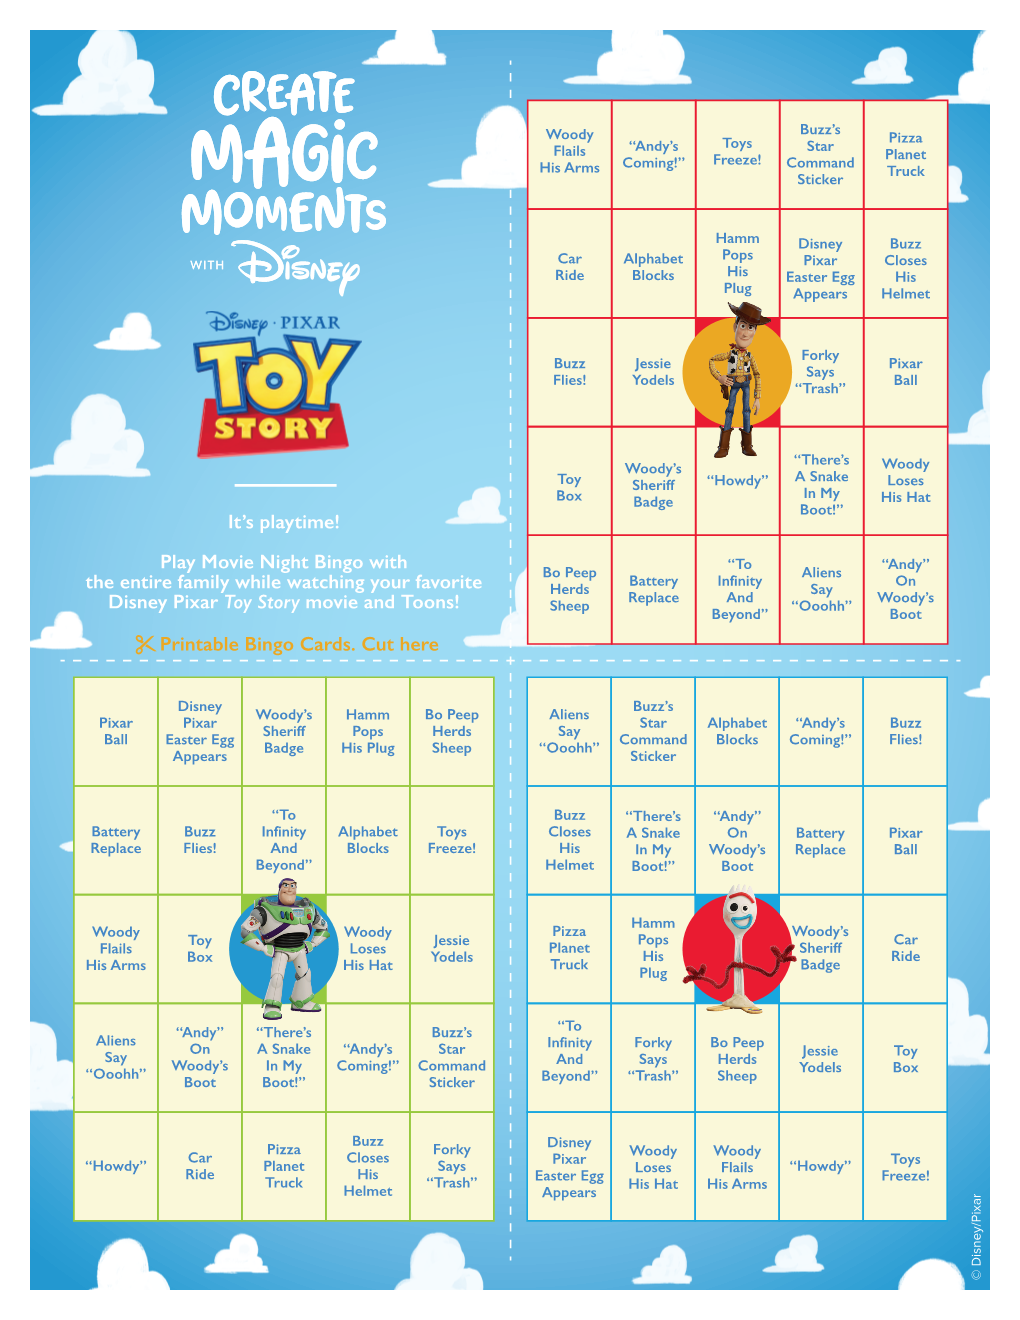 It's Playtime! Play Movie Night Bingo with the Entire Family While Watching